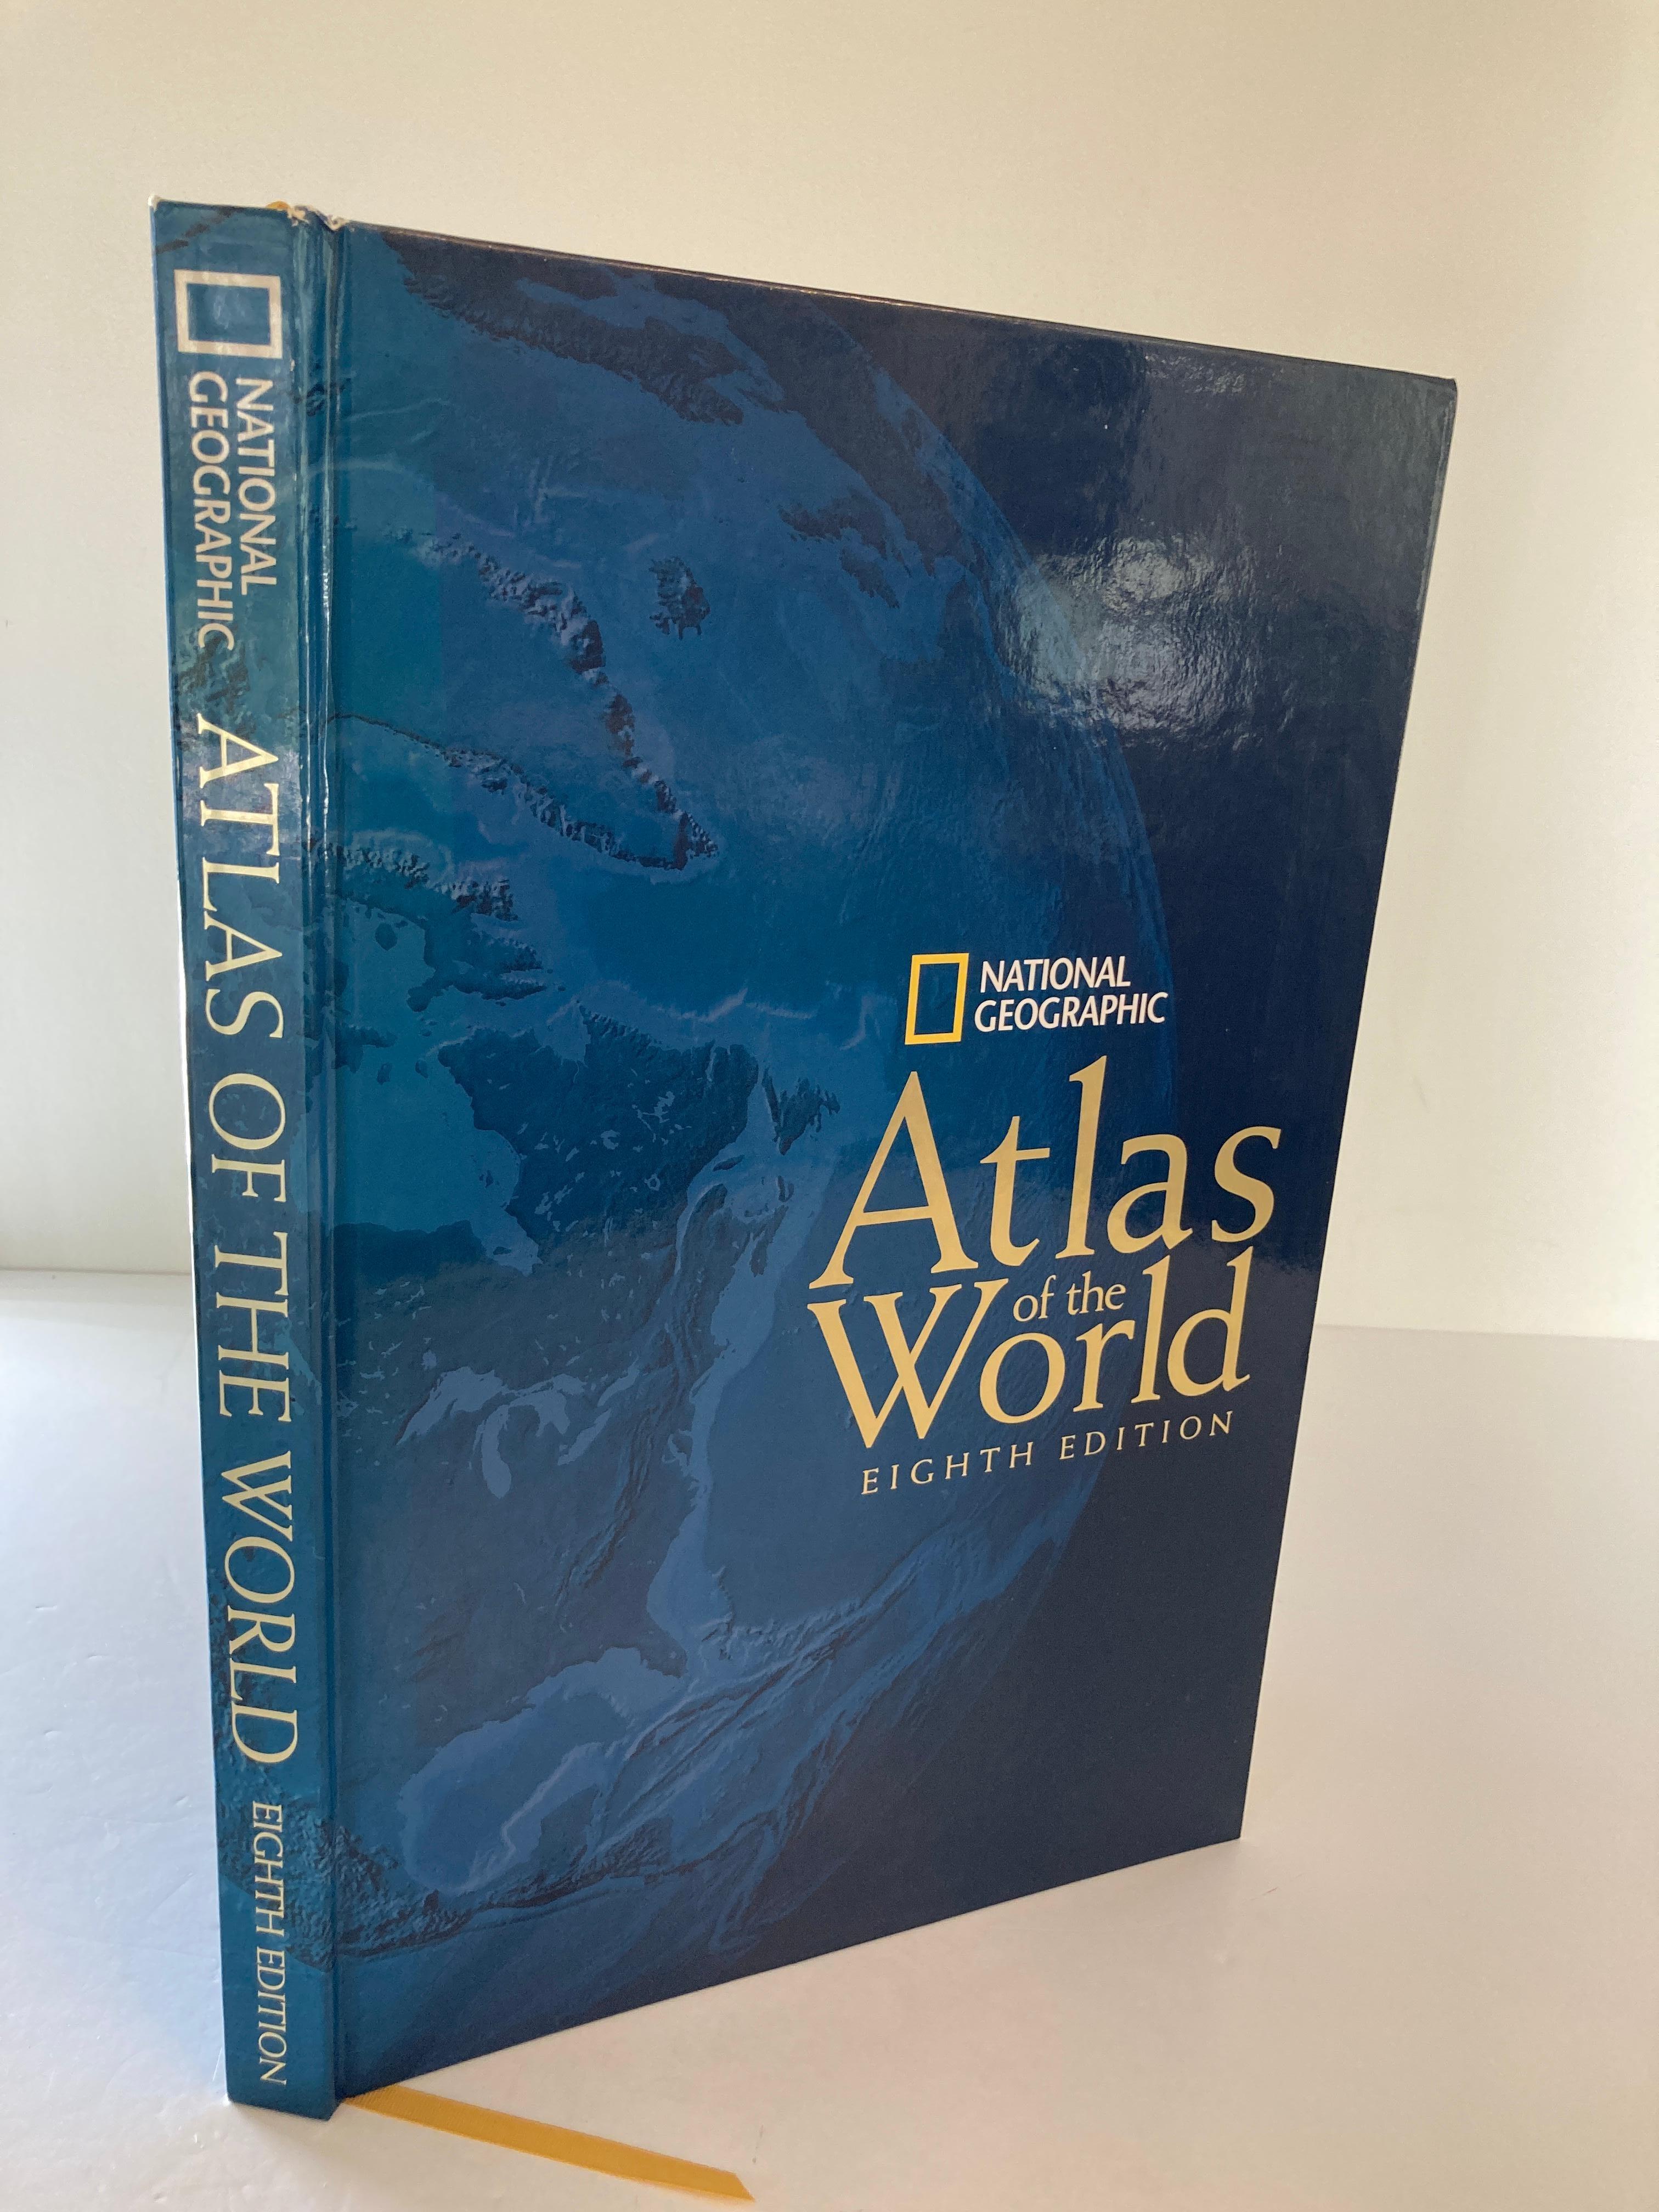 National Geographic Atlas of the World, Eighth Edition
National Geographic
This is a beautiful large library or hardcover coffee table book.
Title: National Geographic Atlas of the World, ...
Publisher: Brand: National Geographic
Publication